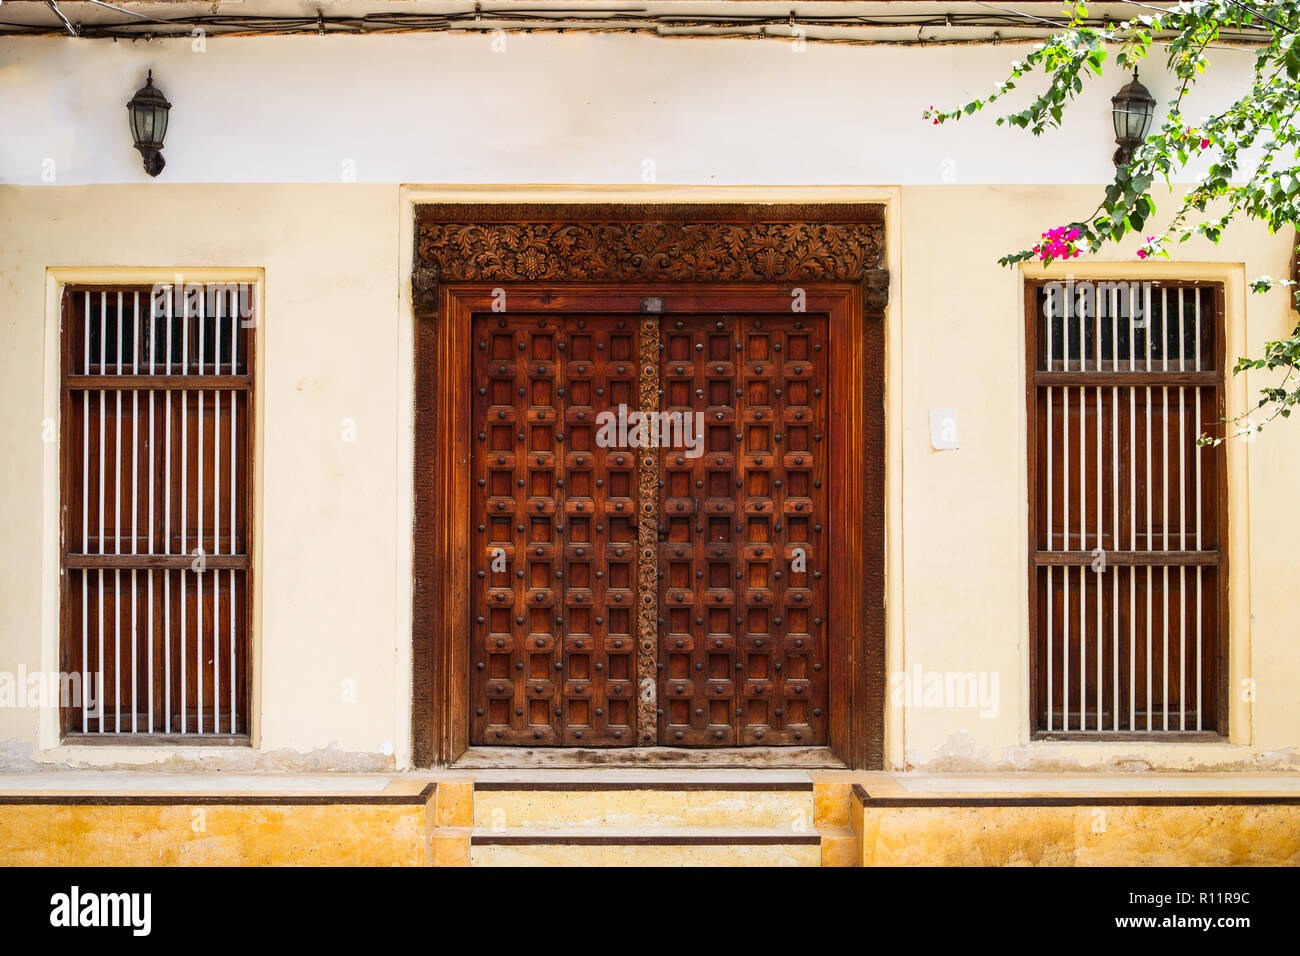 Carved wooden doors of stone town Stock Photo - Alamy